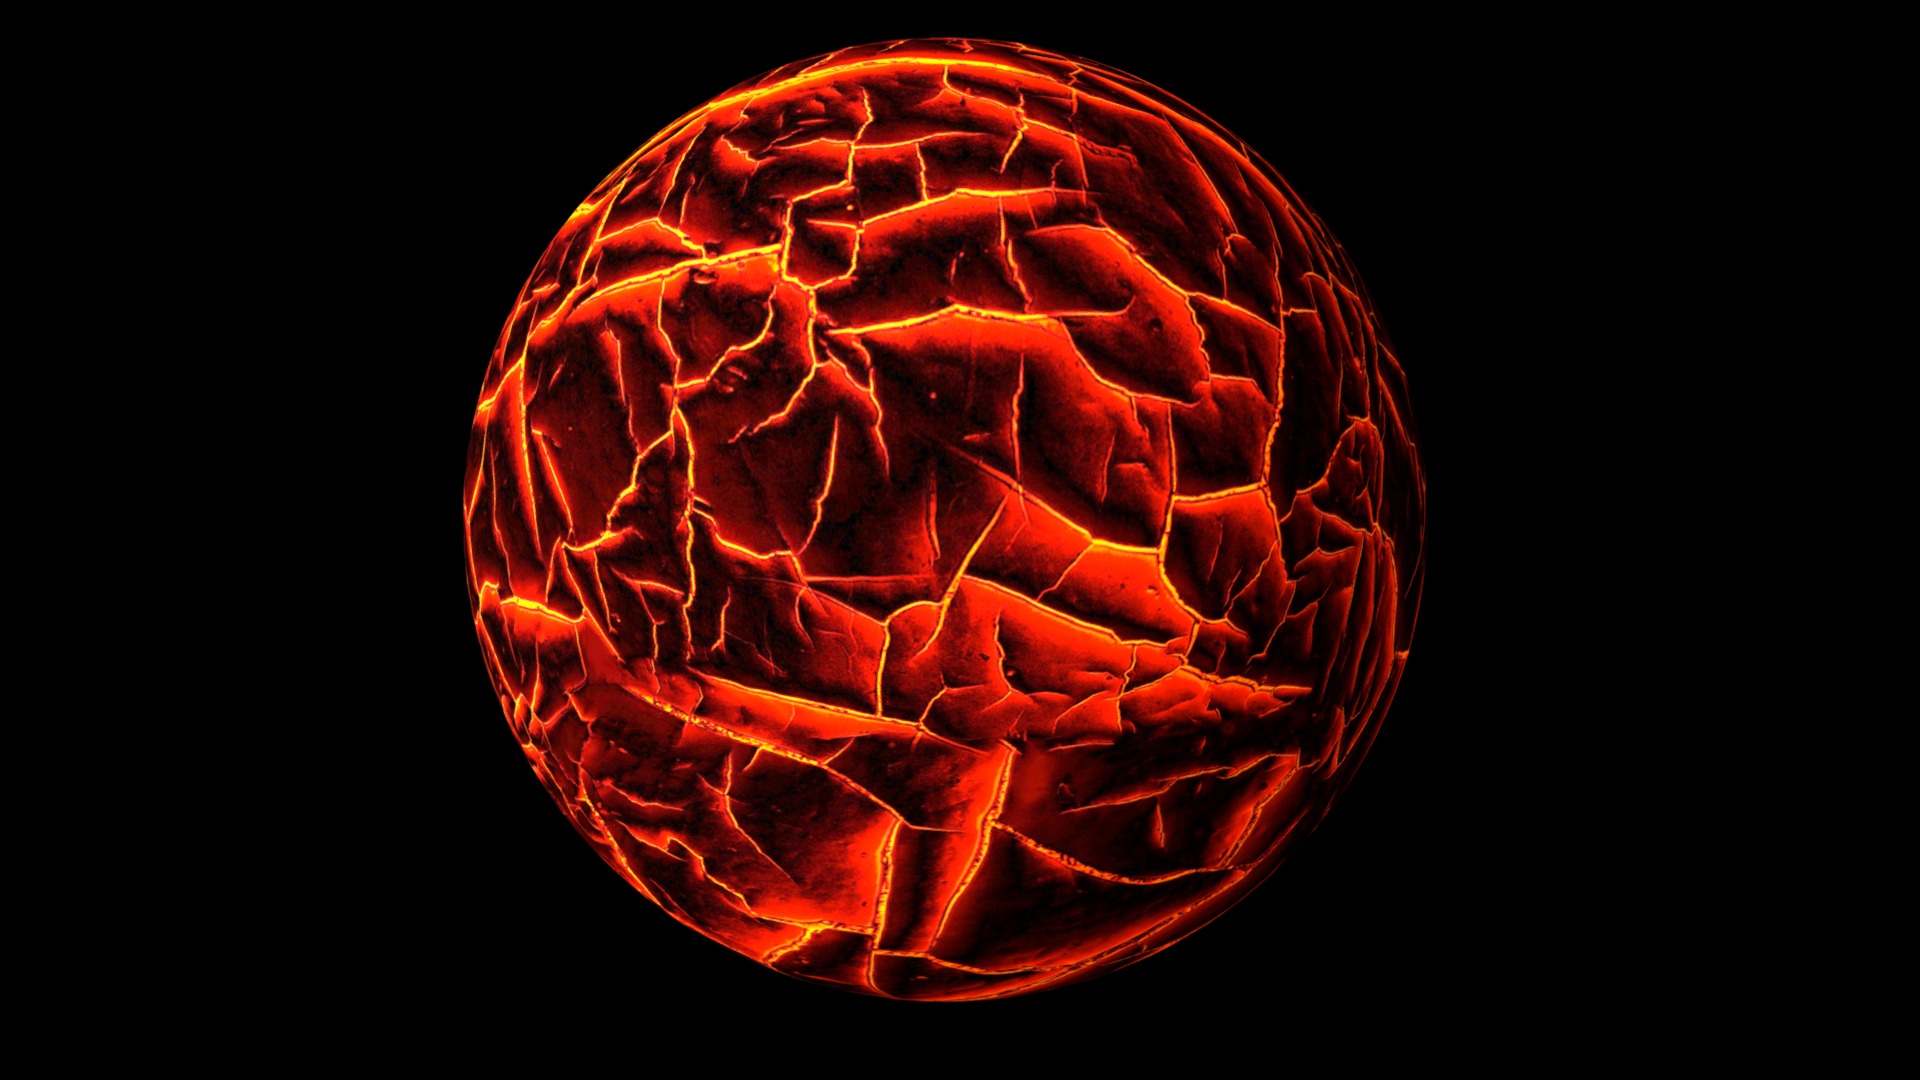 3D model Alien Lava Planet Moon - This is a 3D model of the Alien Lava Planet Moon. The 3D model is about a red and orange glowing pumpkin.